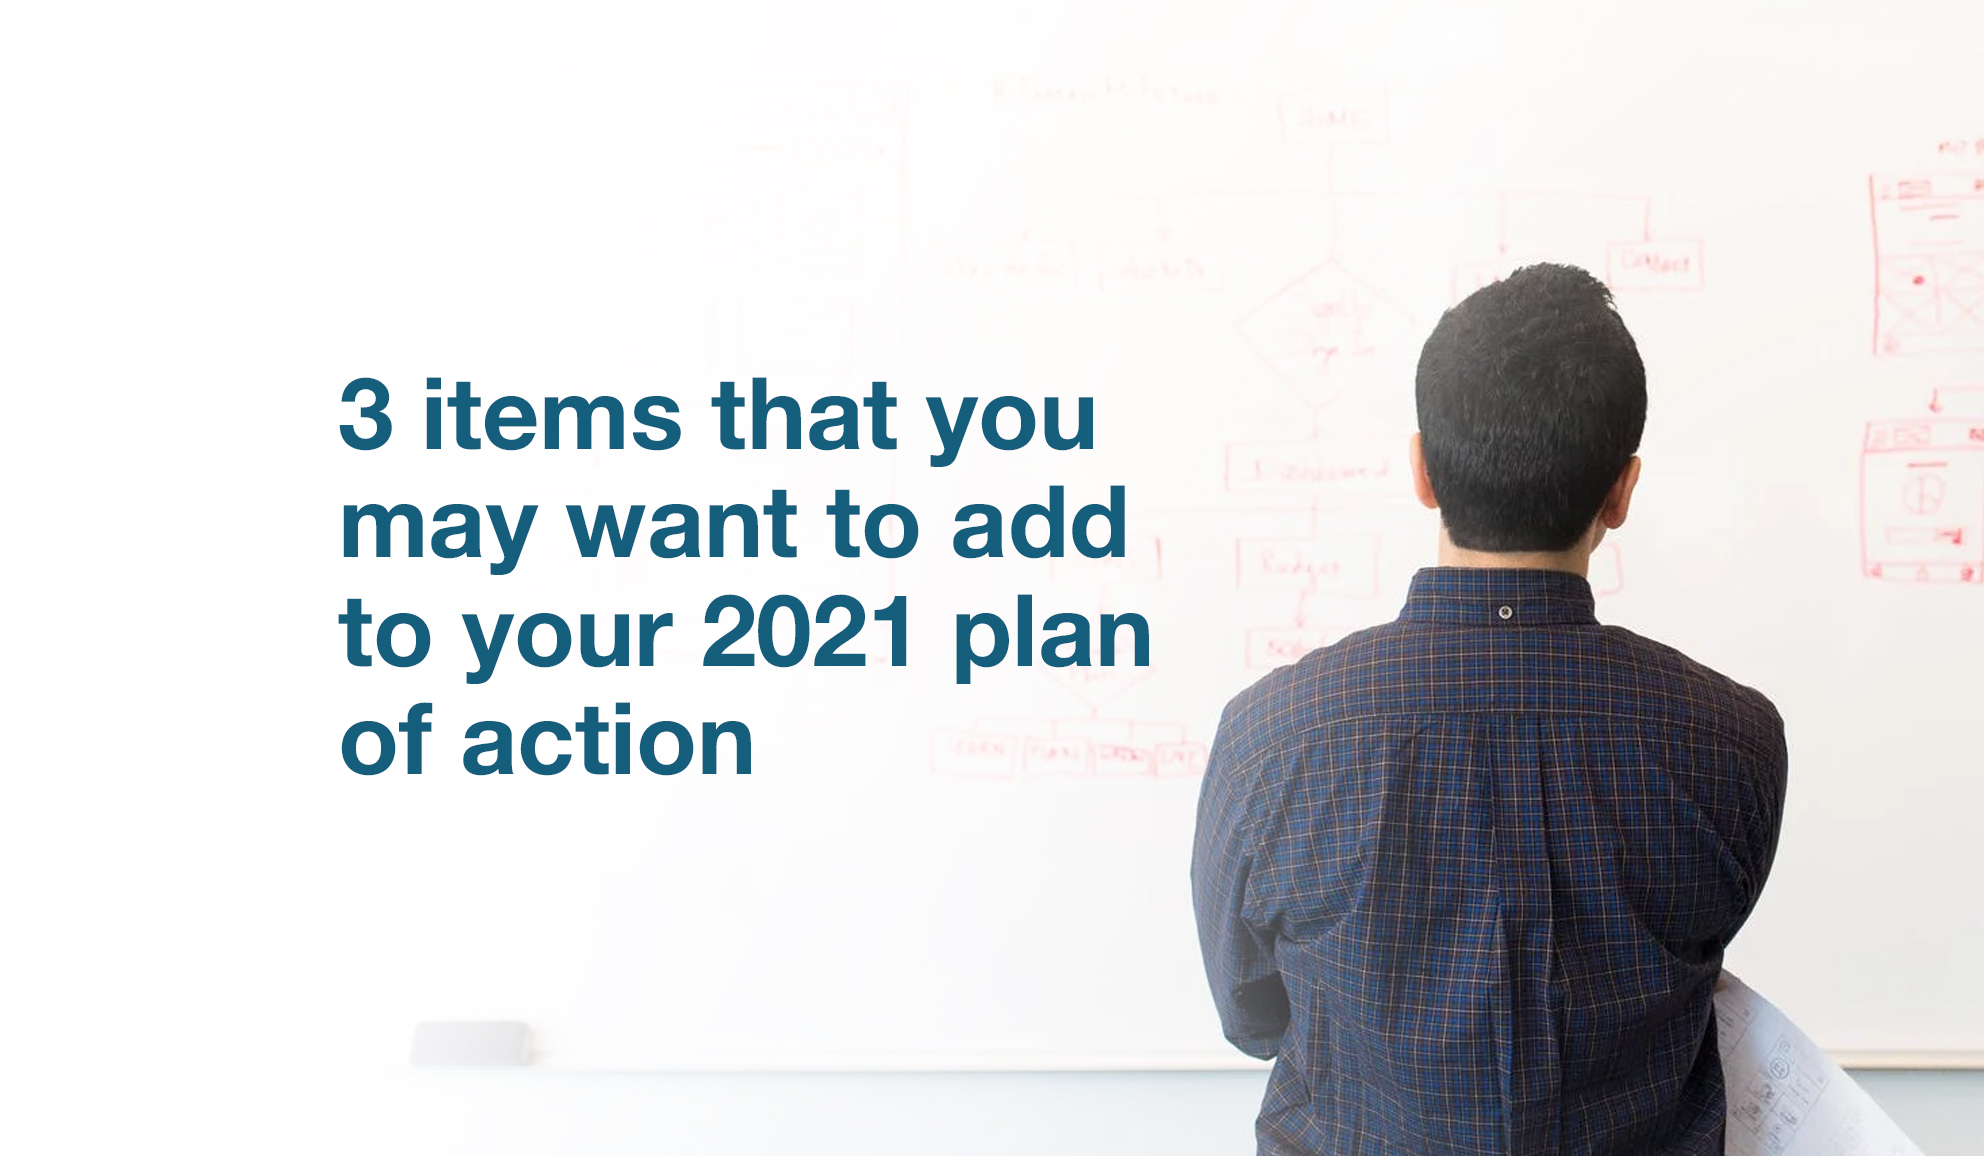 Here are some items that you may want to add to your 2021 plan of action: